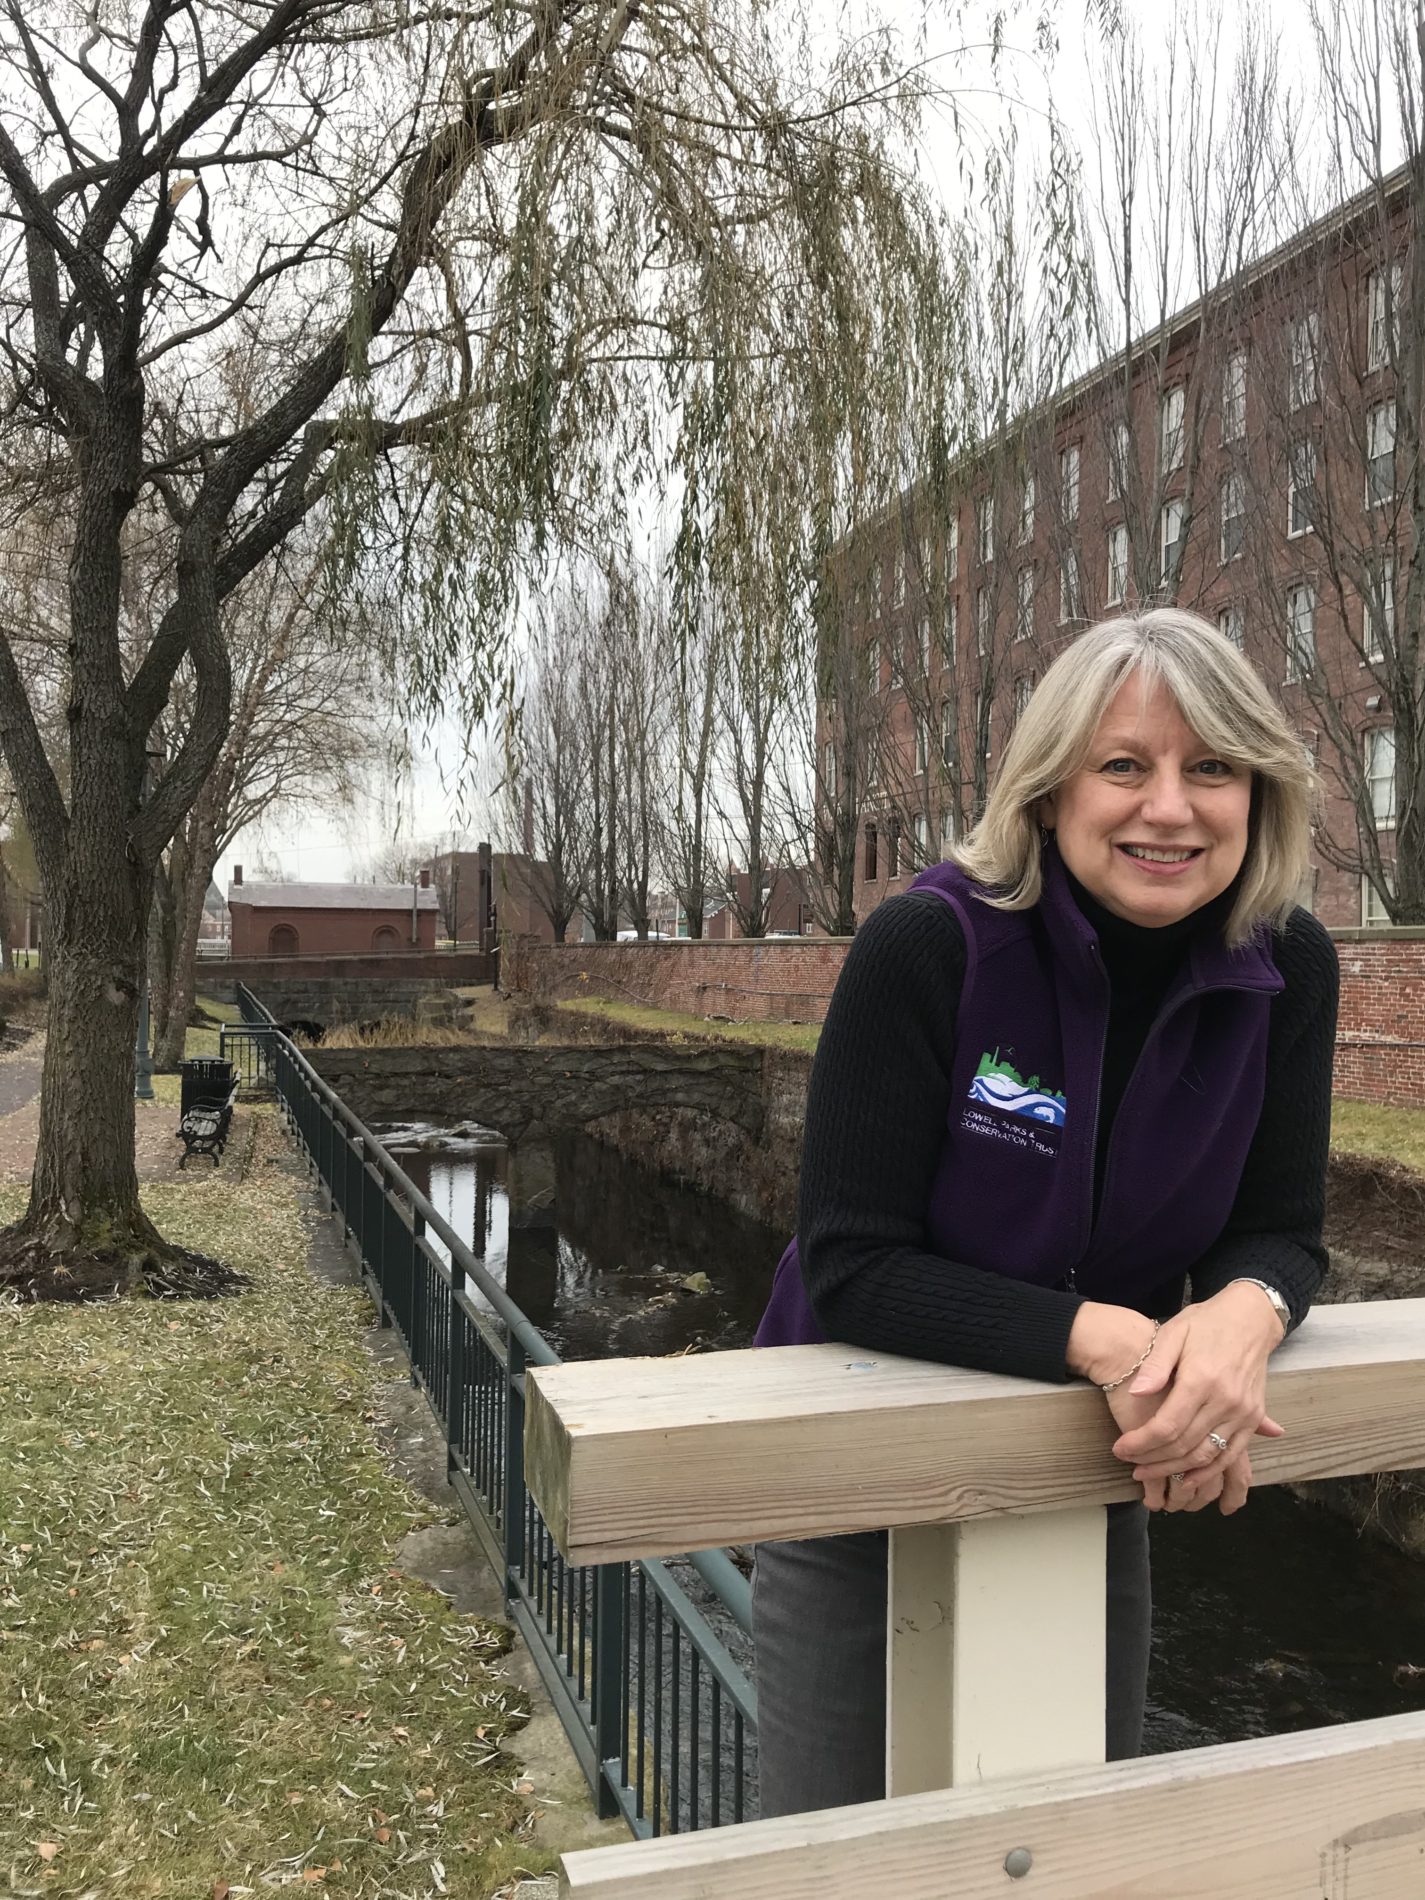 Sheila Kirschbaum LP&CT president smiling by a Lowell canal and willow tree